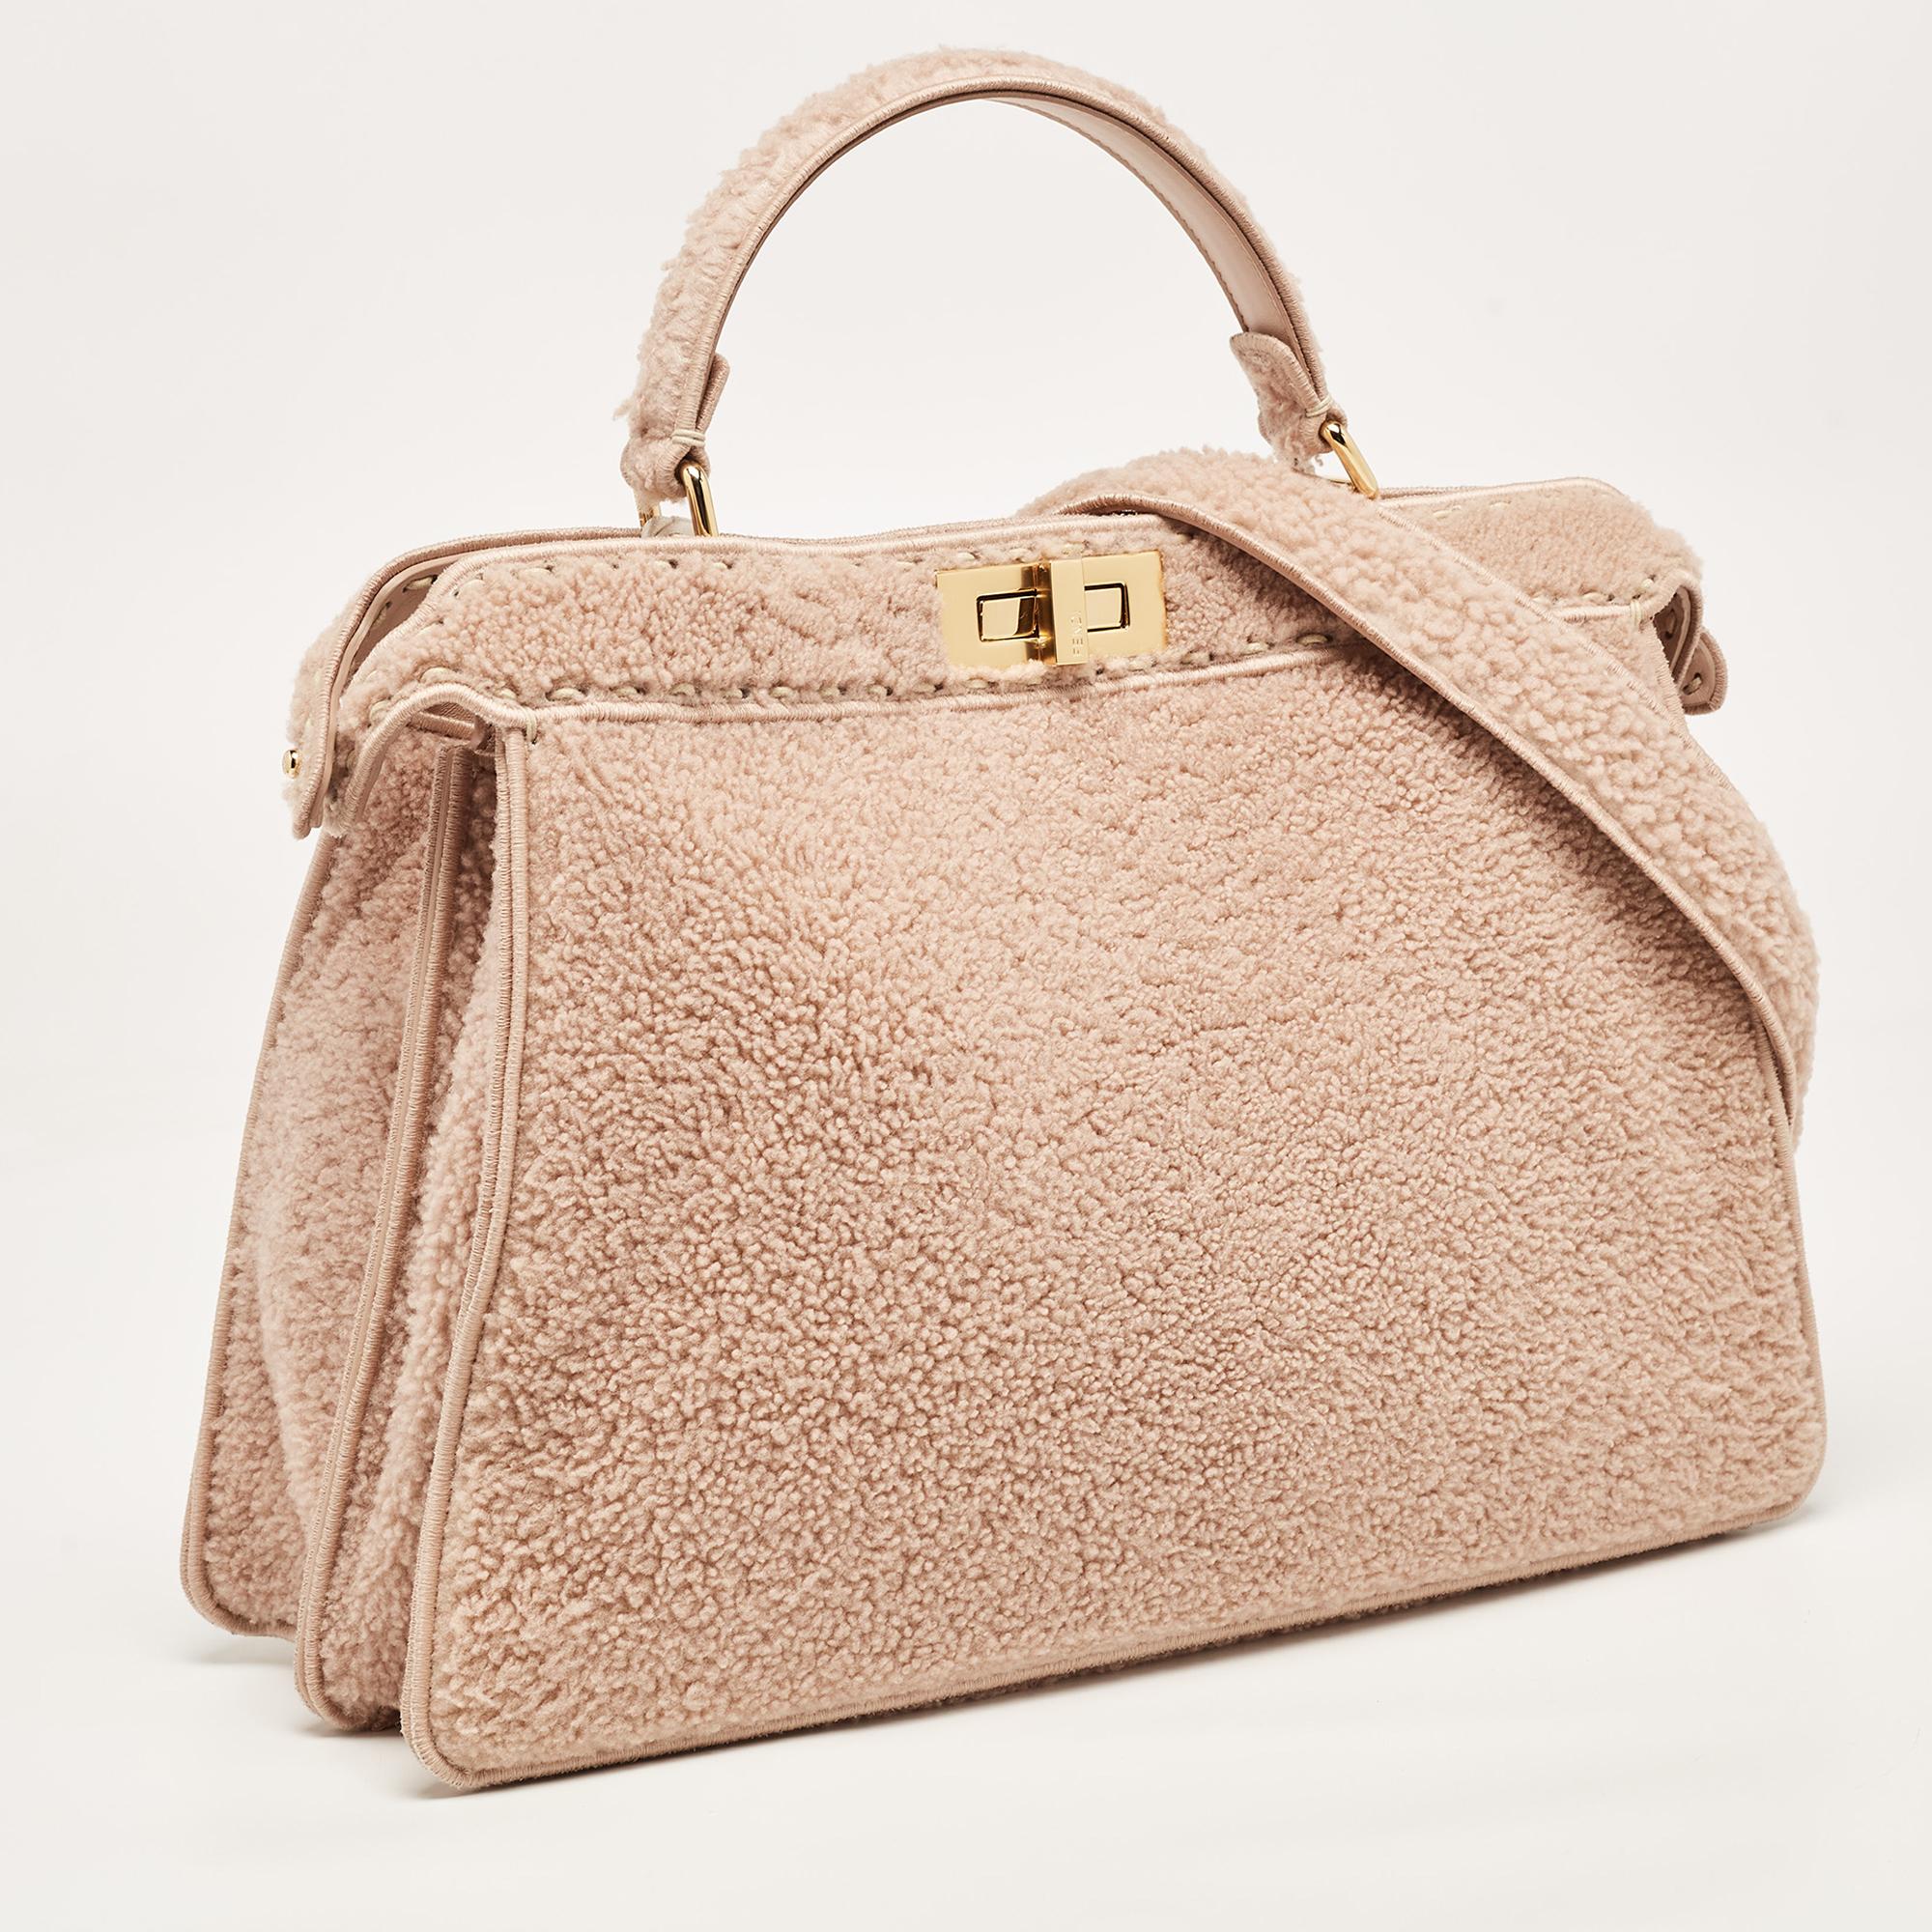 The Fendi Peekaboo ISeeU bag exudes luxury with its plush shearling exterior in a sophisticated dusty pink hue. The iconic Peekaboo design is elevated with a spacious interior and a top handle adds a timeless touch.

Includes: Original Dustbag,